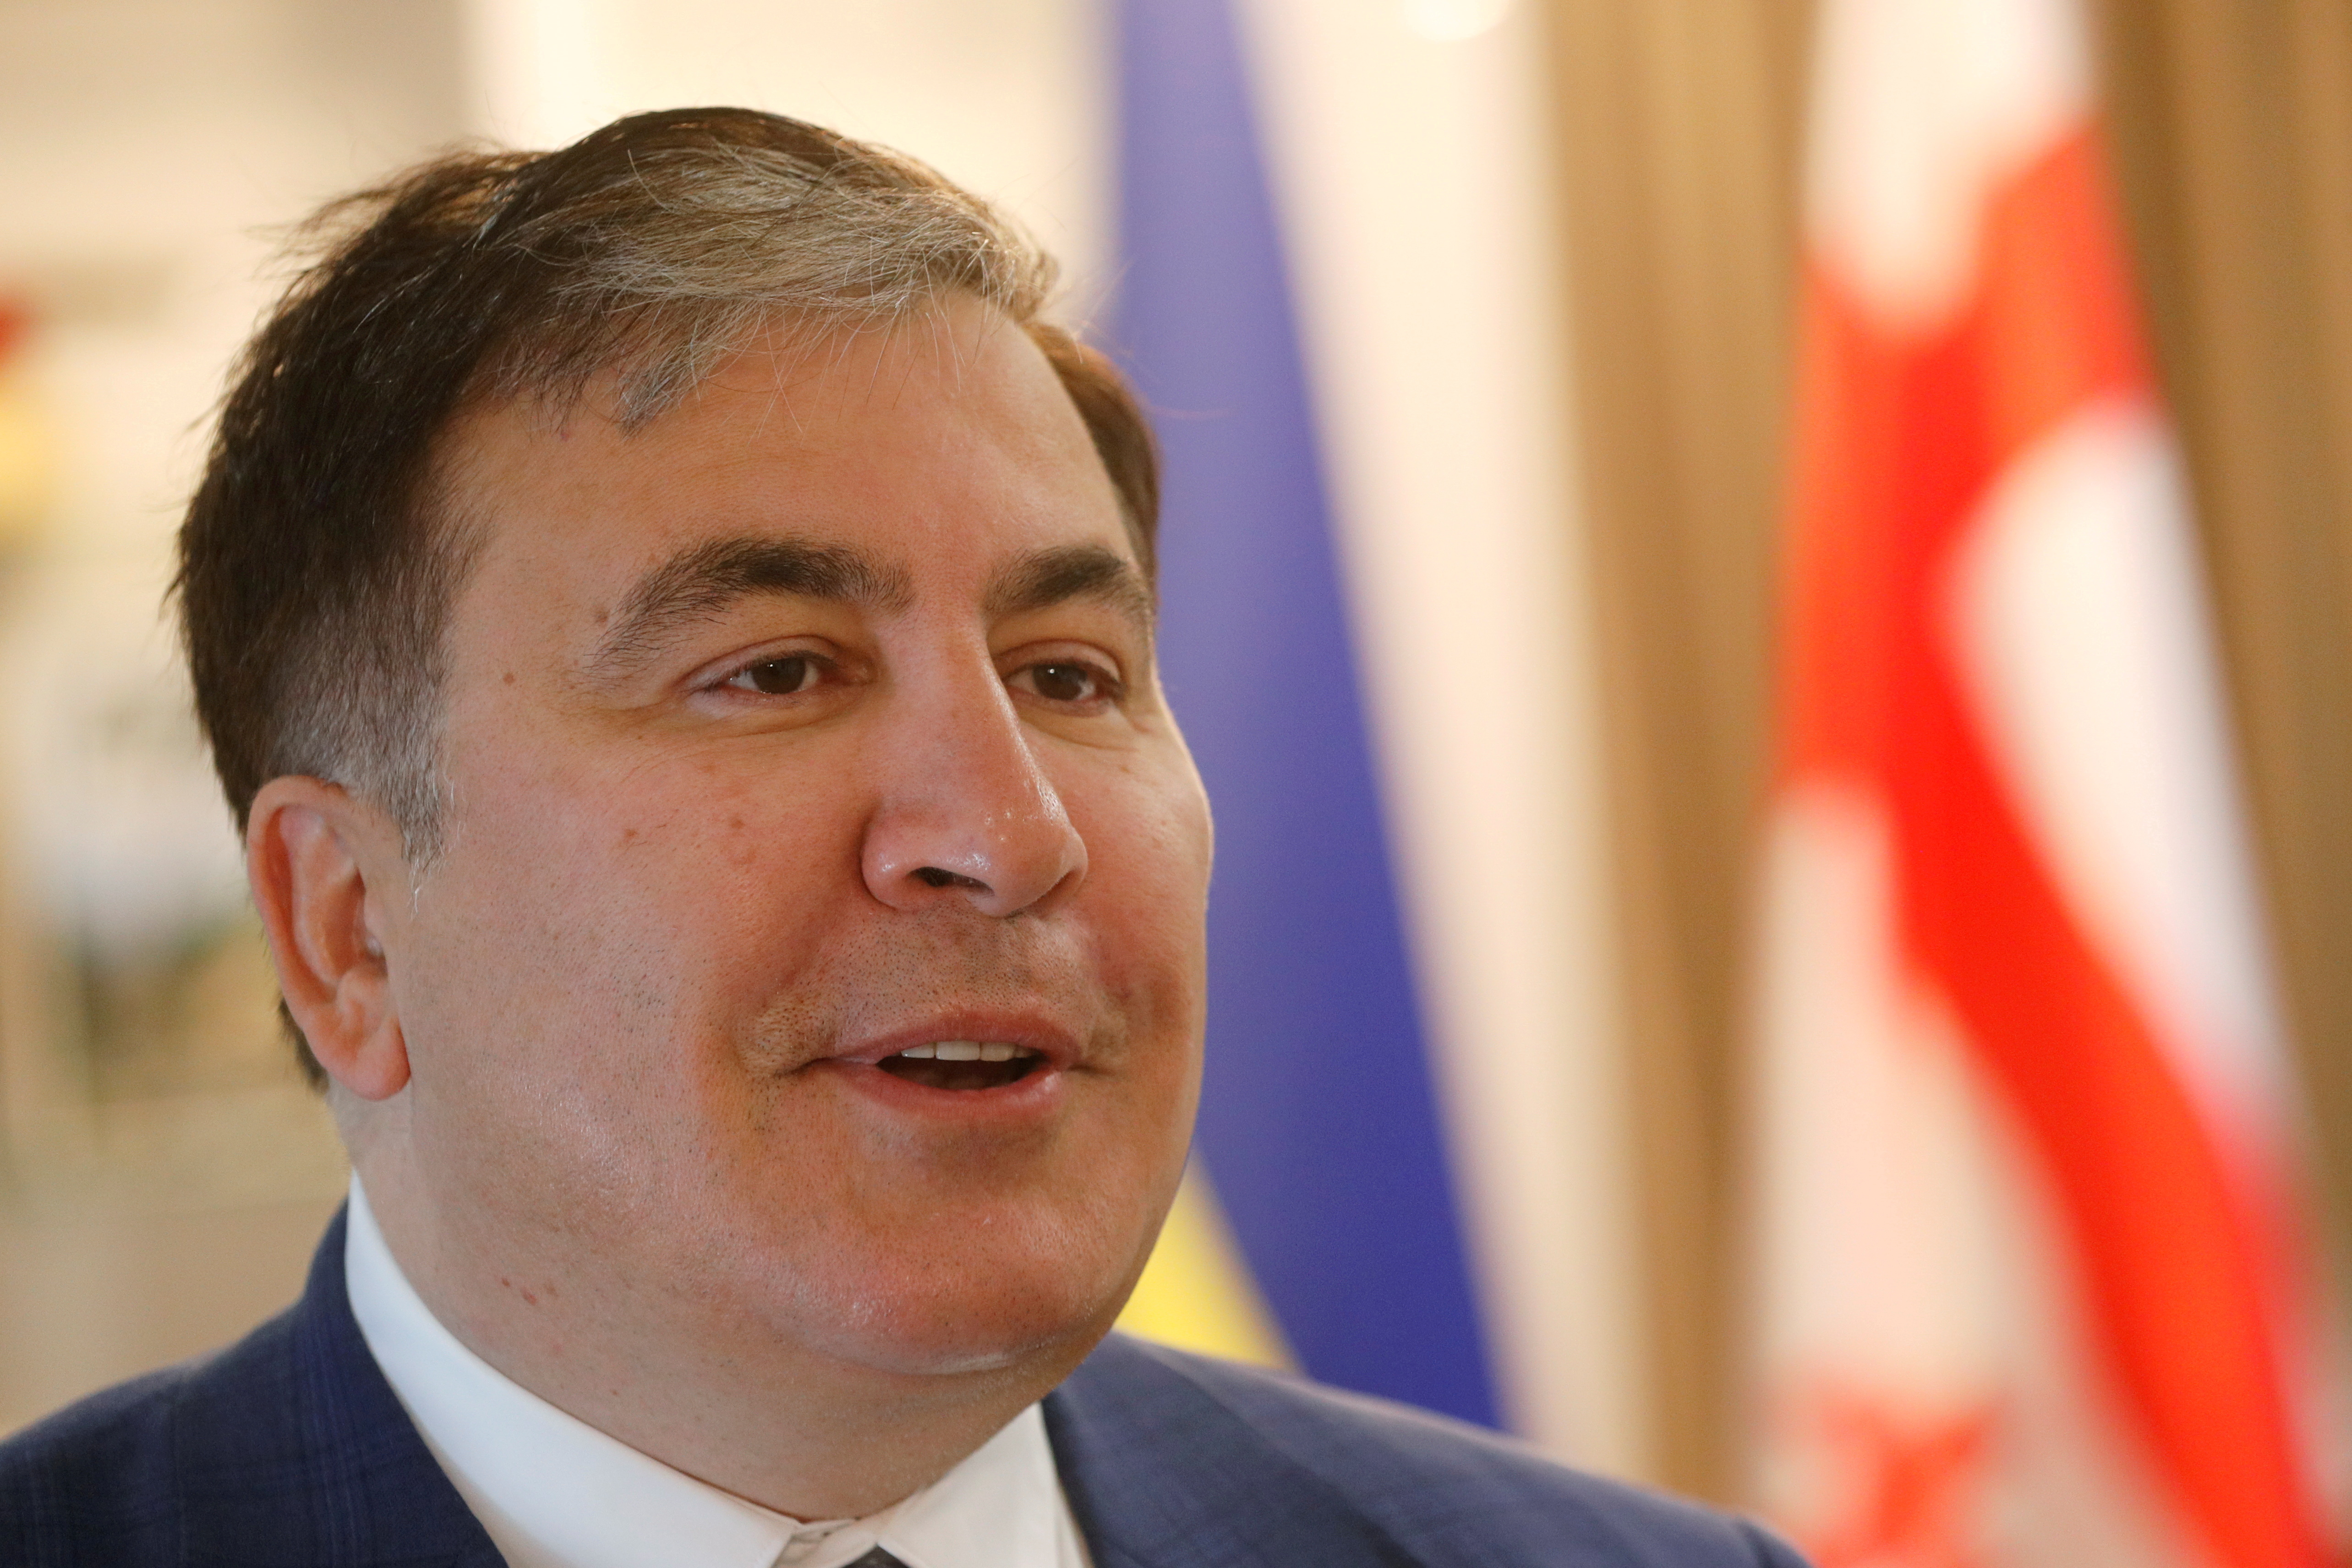 Mikheil Saakashvili, Georgia's former president and newly appointed head of the executive committee of Ukraine's National Reform Council attends an interview outside Kiev